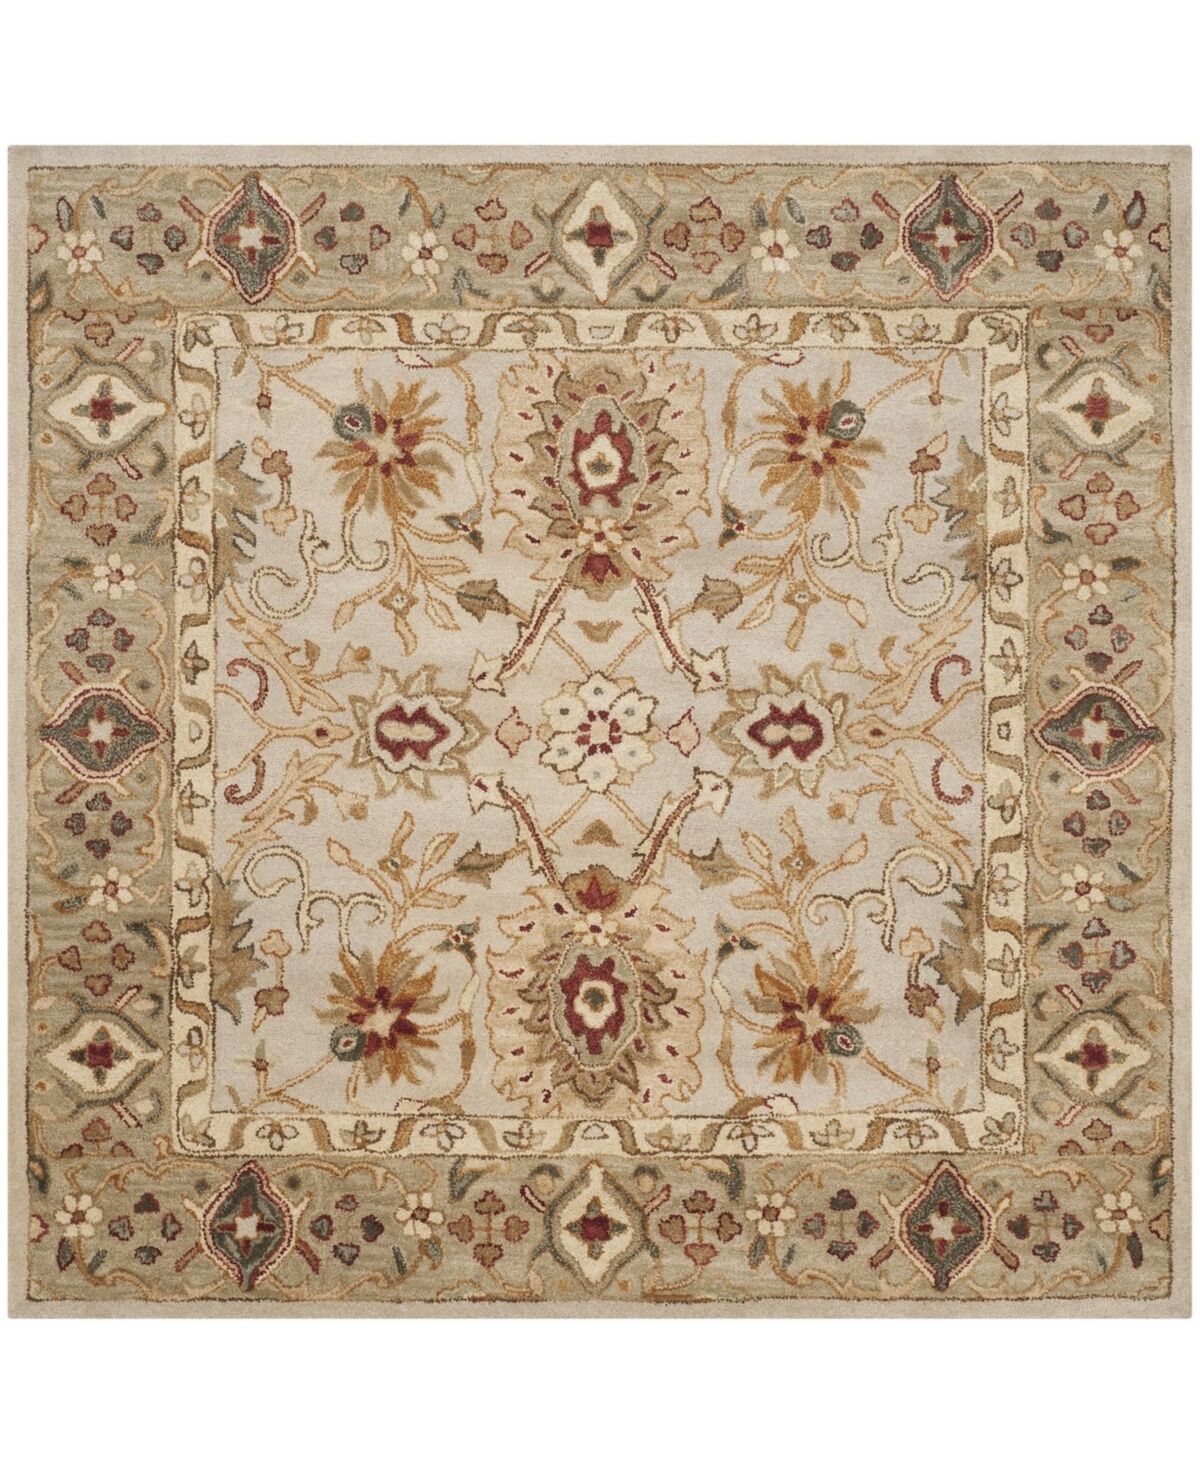 Safavieh Antiquity At816 Gray and Beige 6' x 6' Square Area Rug - Gray